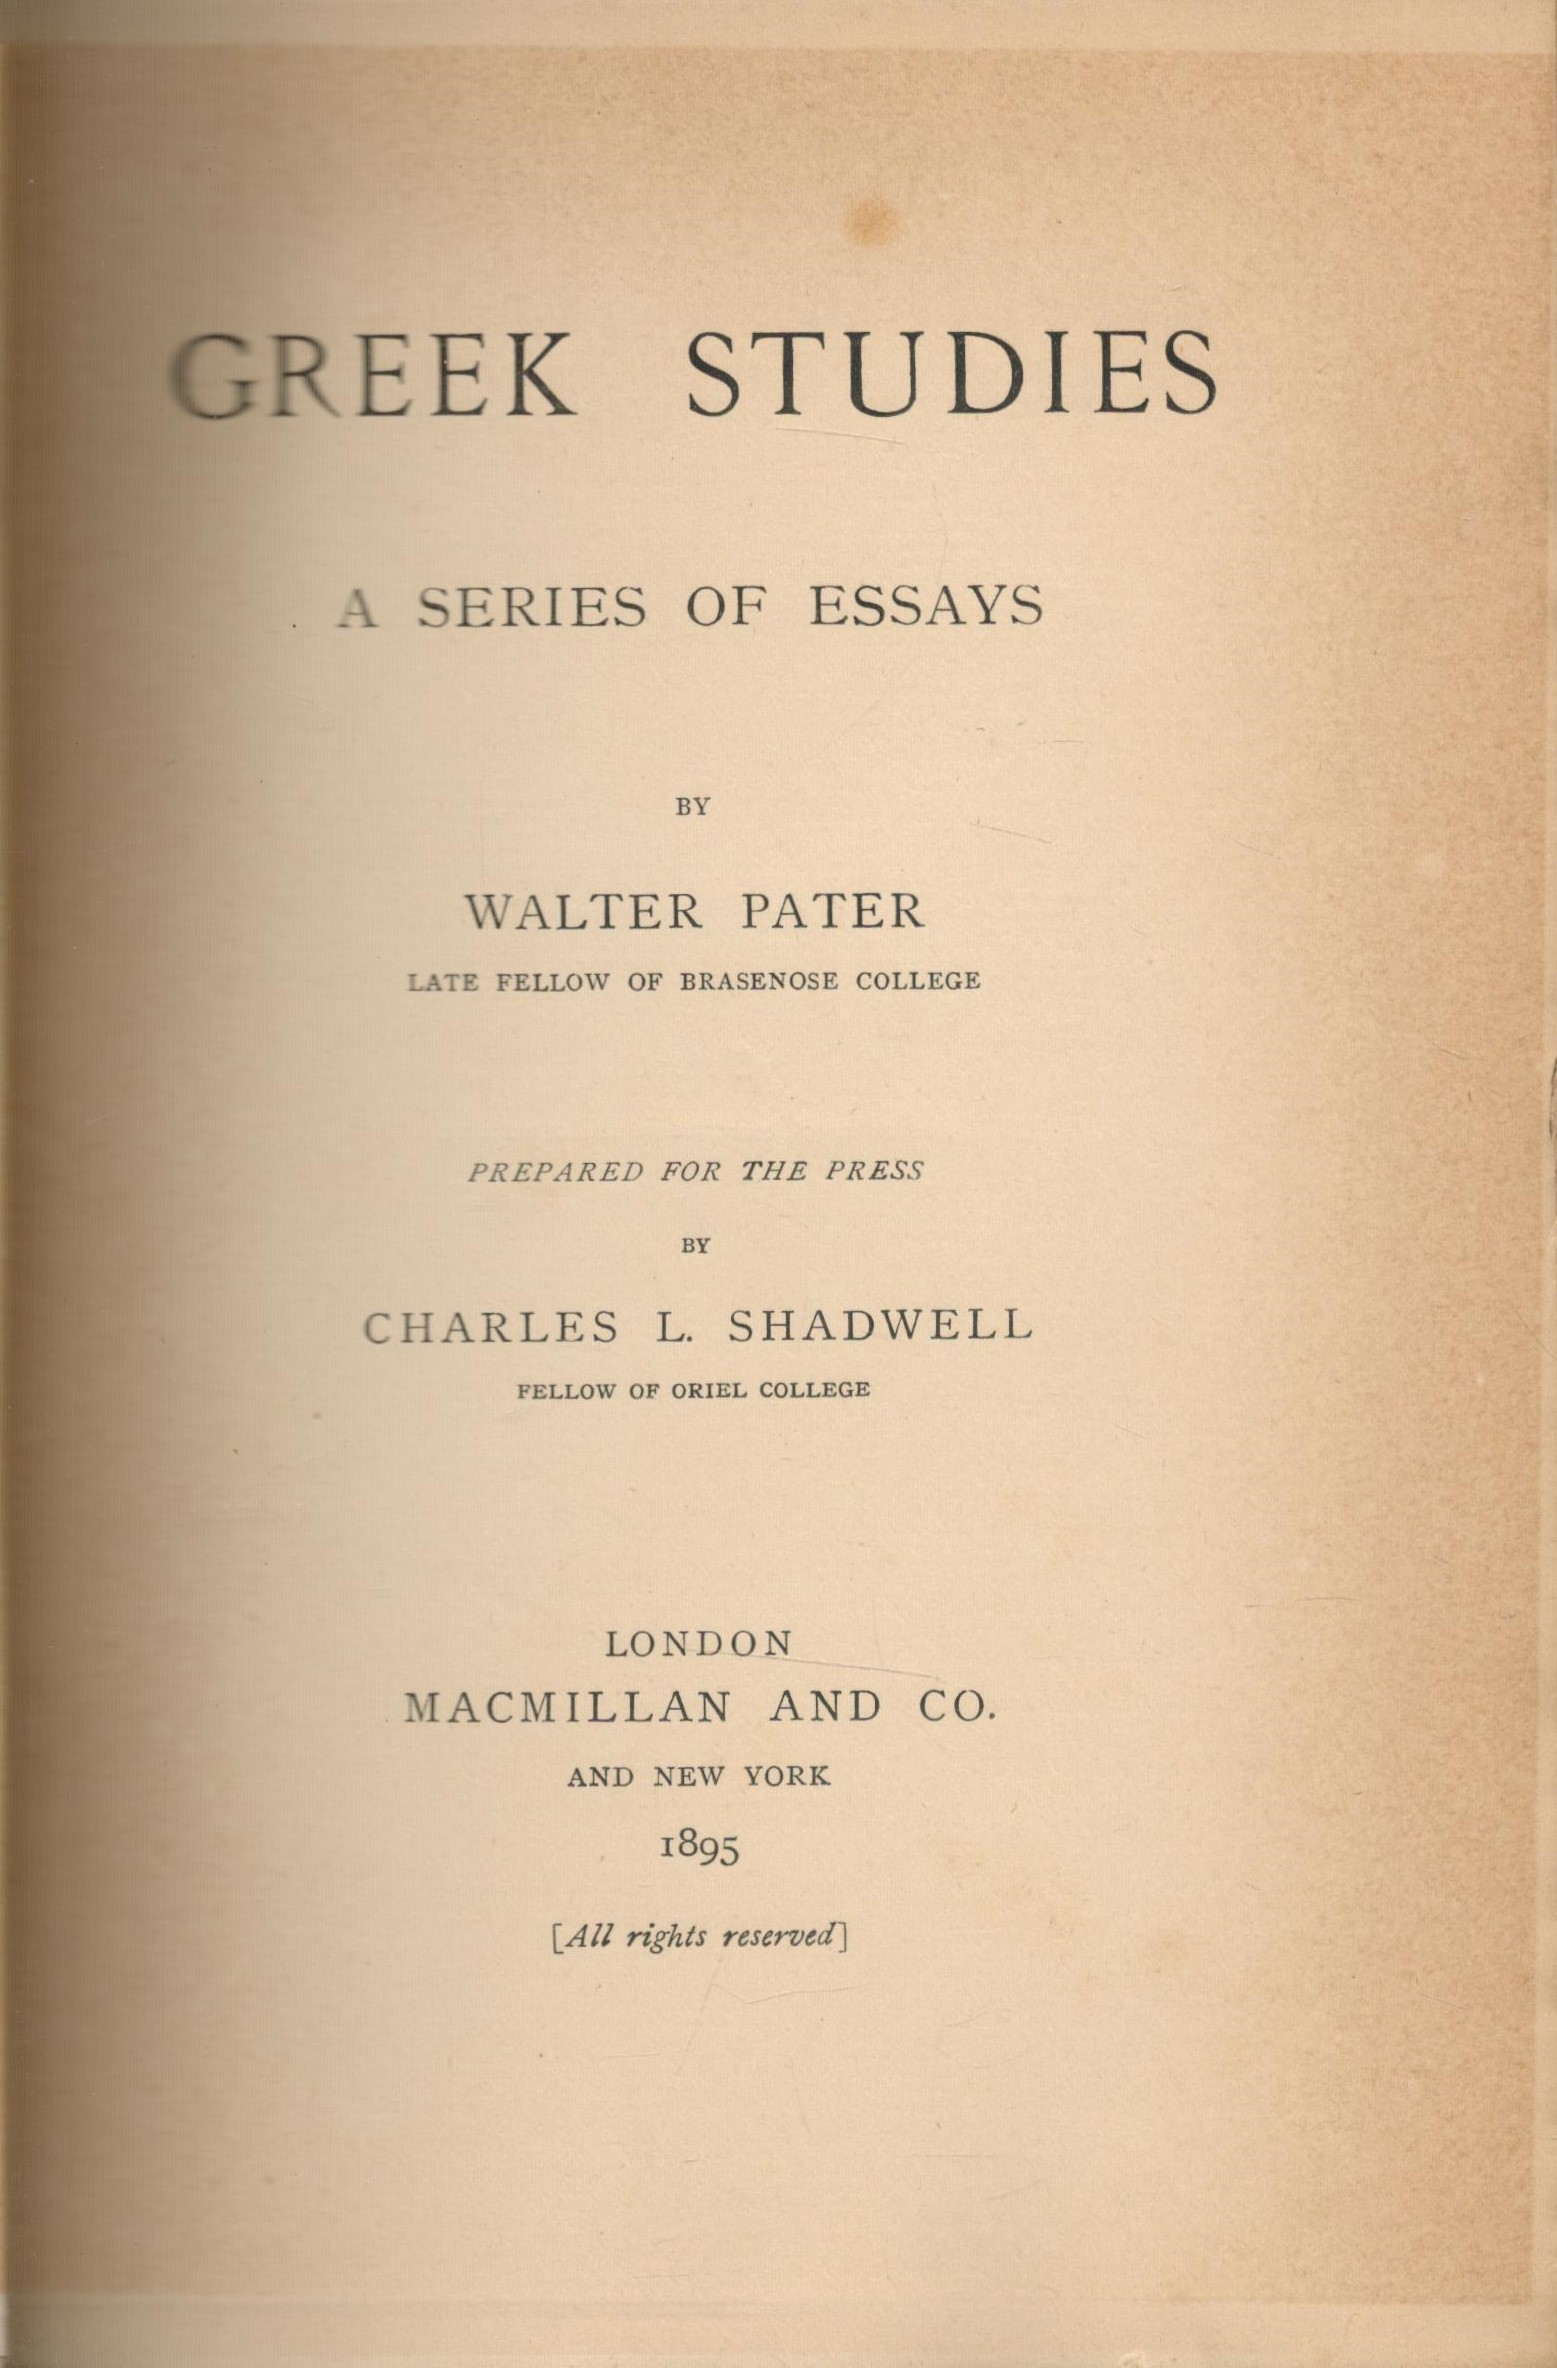 Walter Pater This is a ten-volume matching set of works by Walter Pater. This ten set of matching - Image 4 of 4